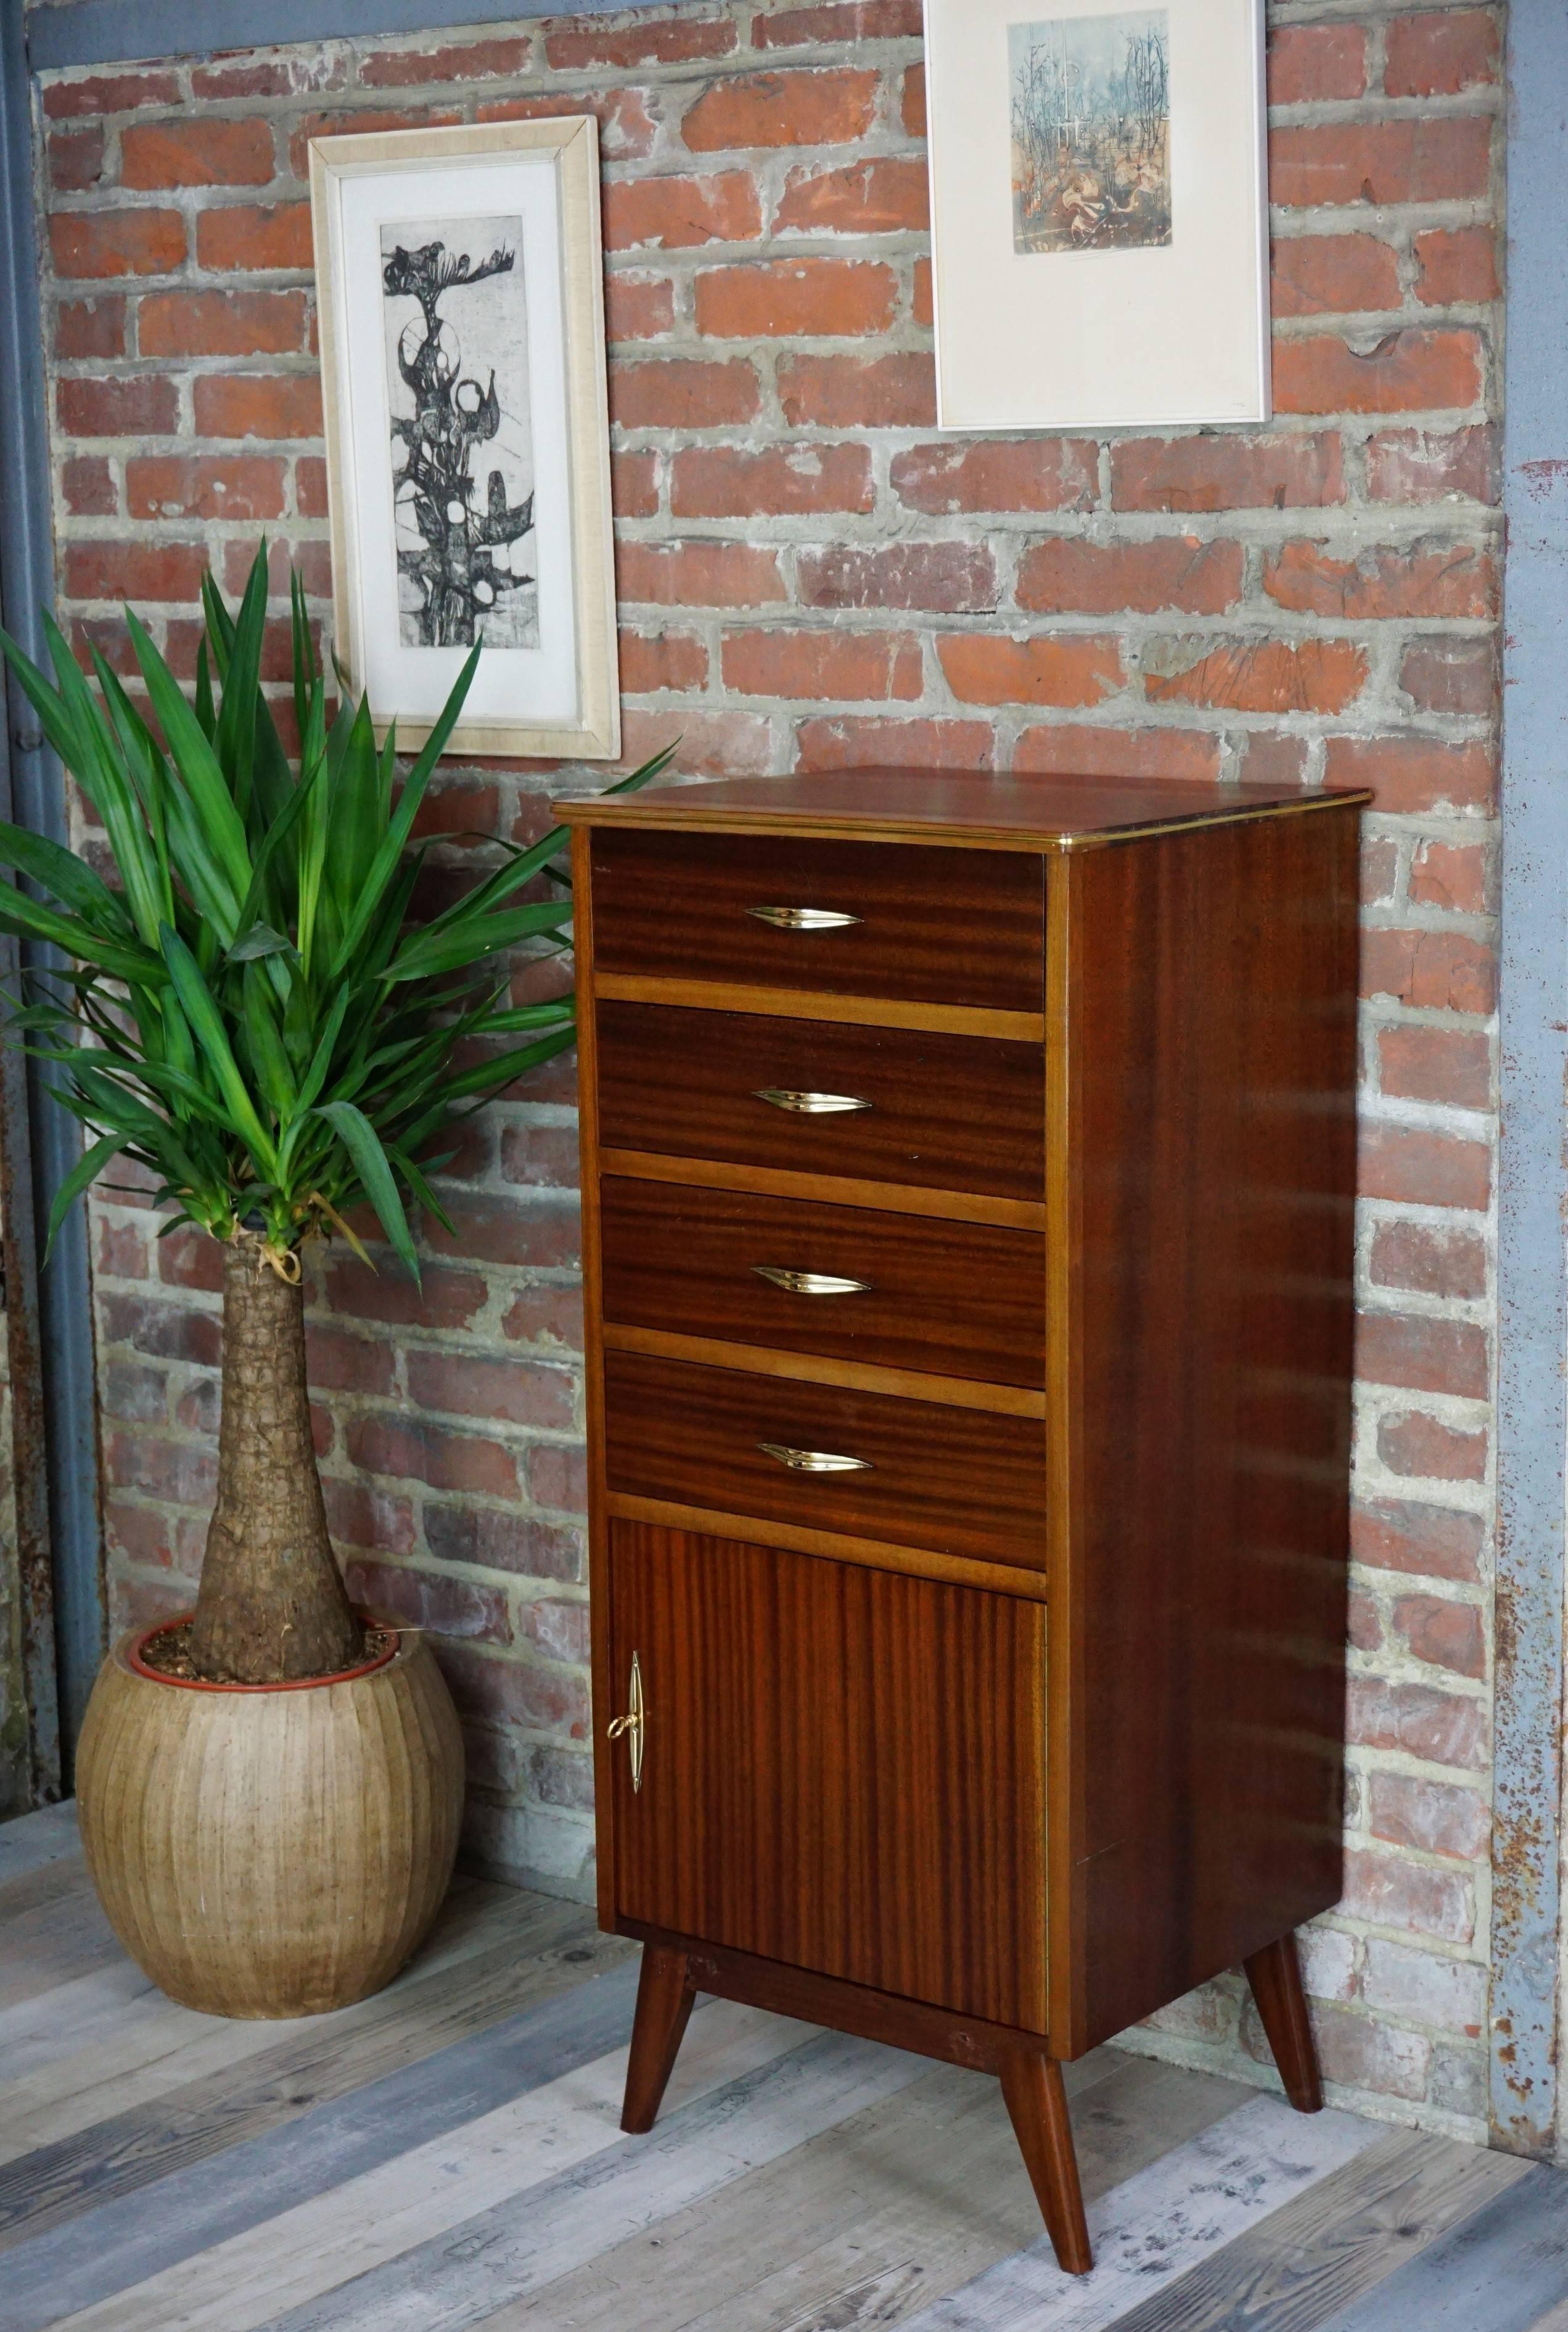 Mid-Century Modern High Chest of Drawers Design from the 1950s